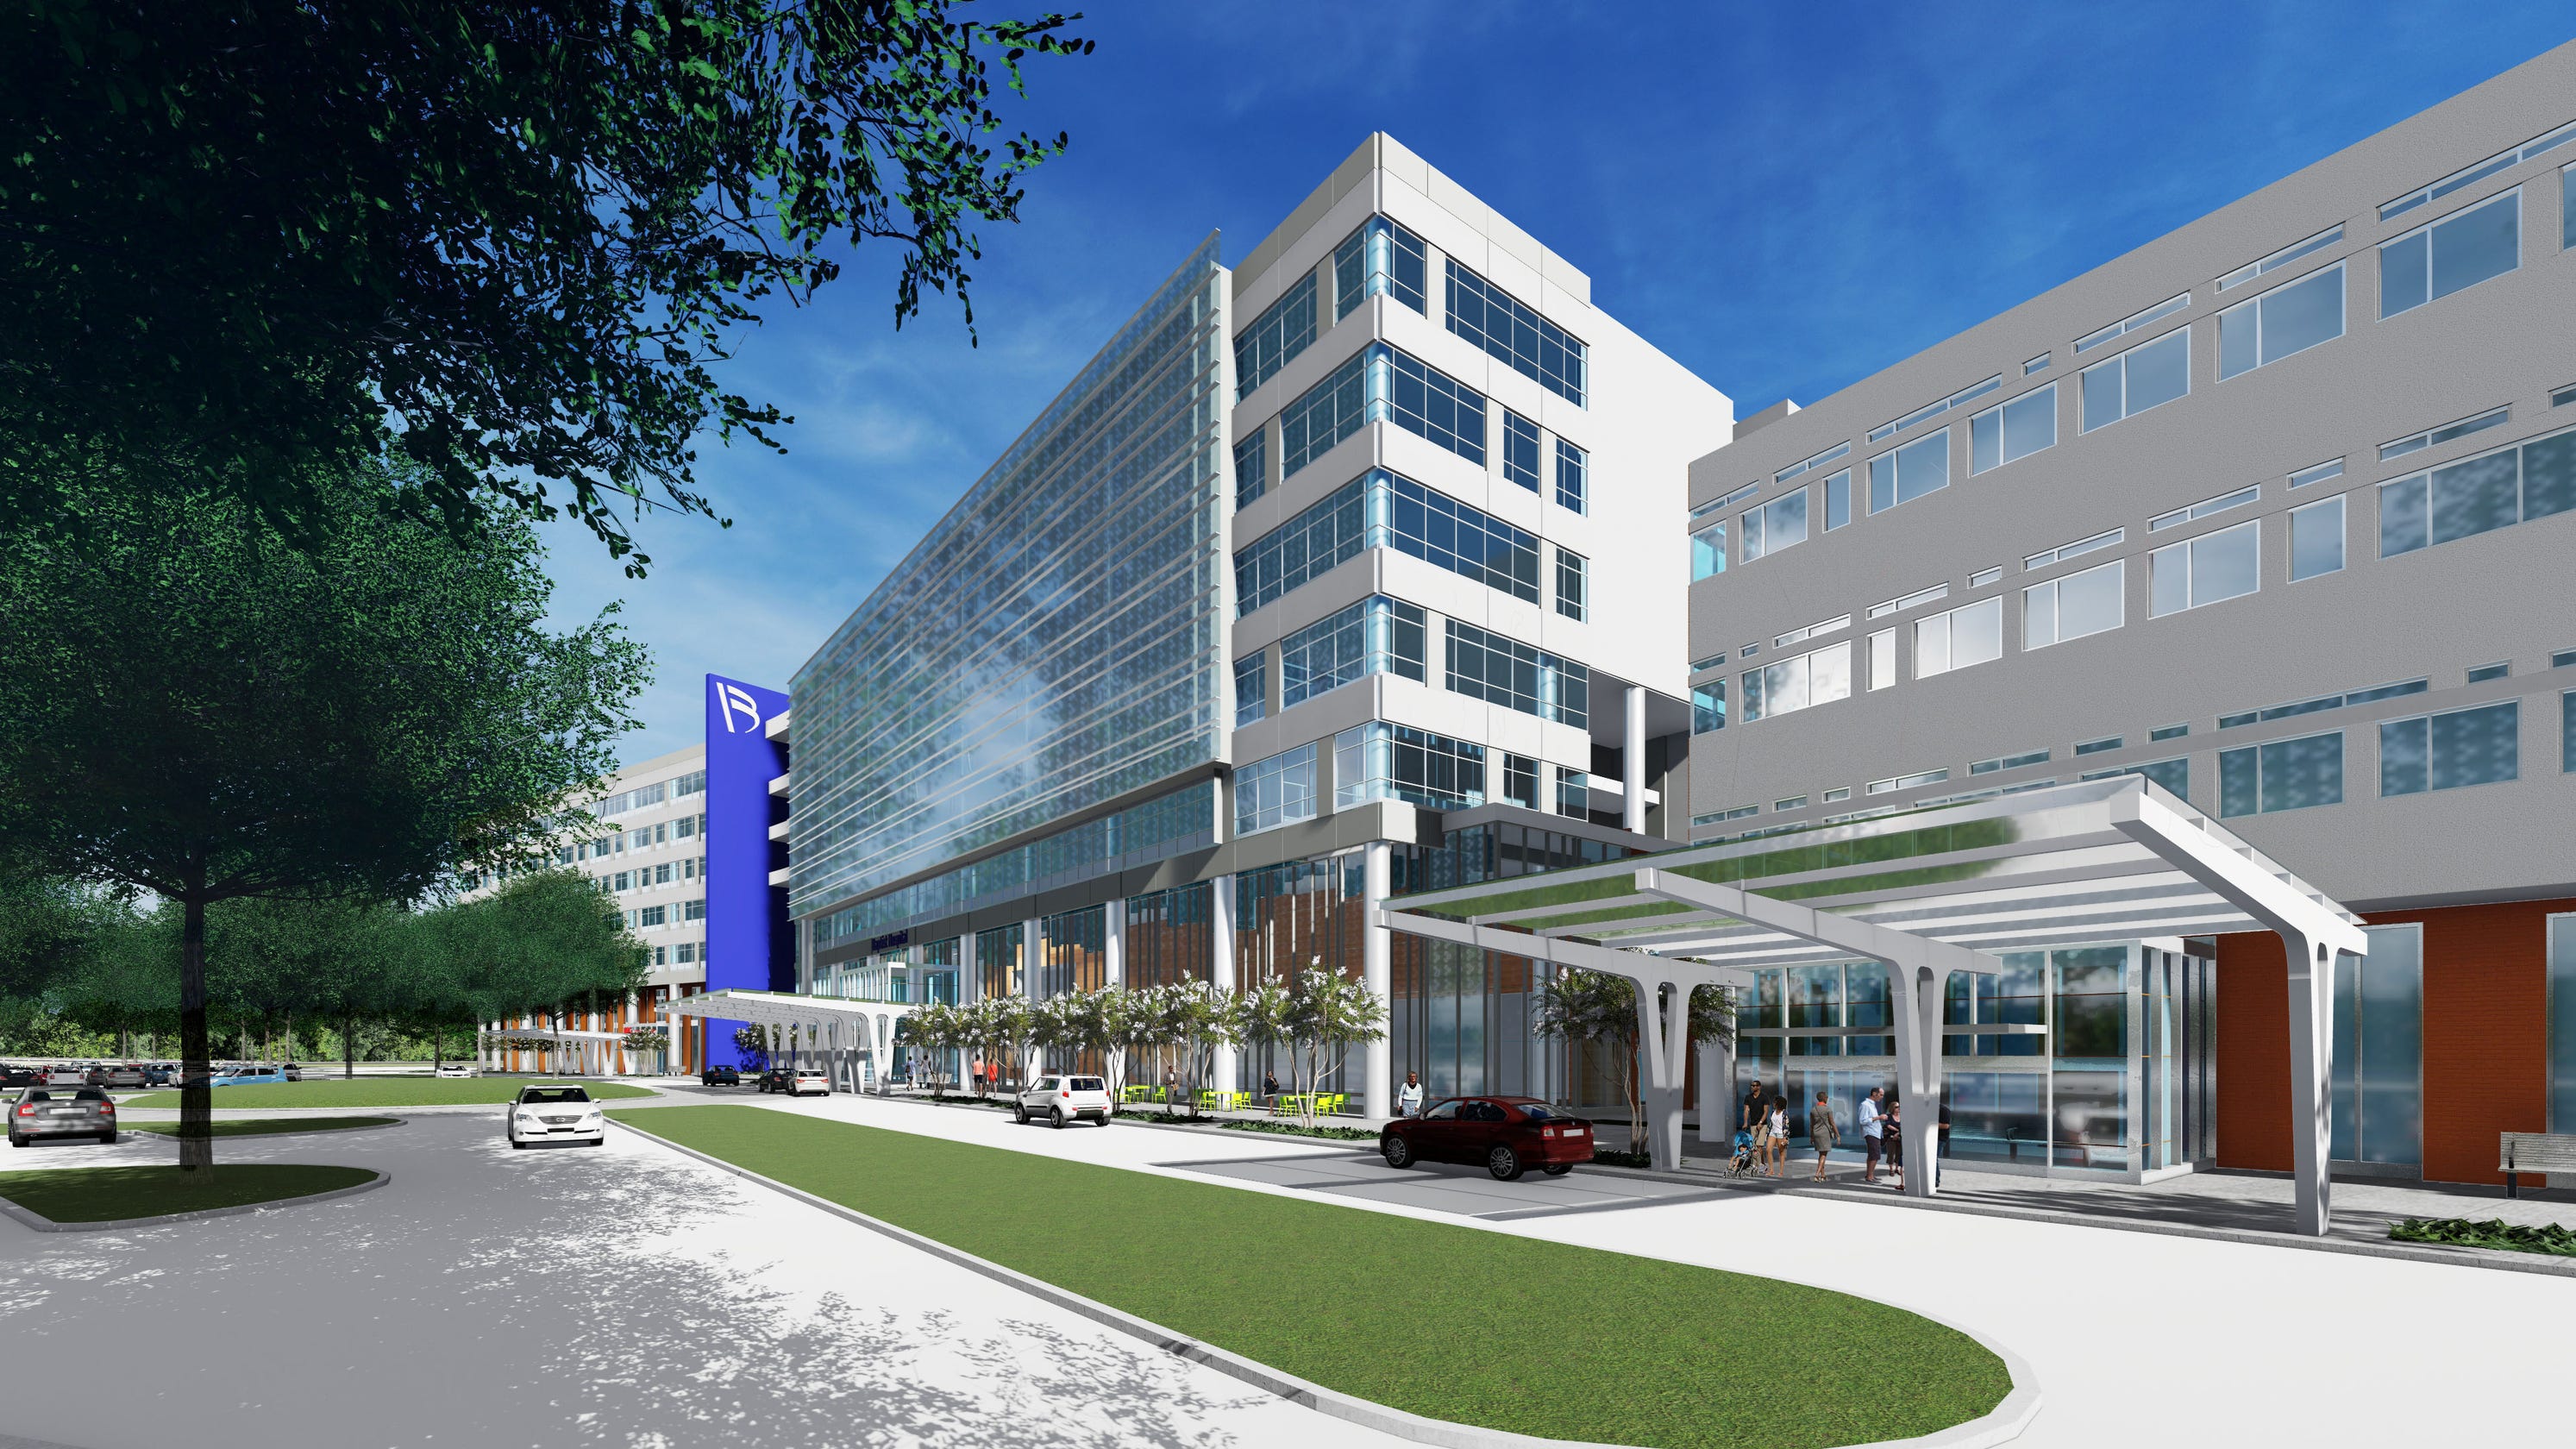 Local and minority contractors wanted for Baptist Hospital and Pensacola airport expansions image